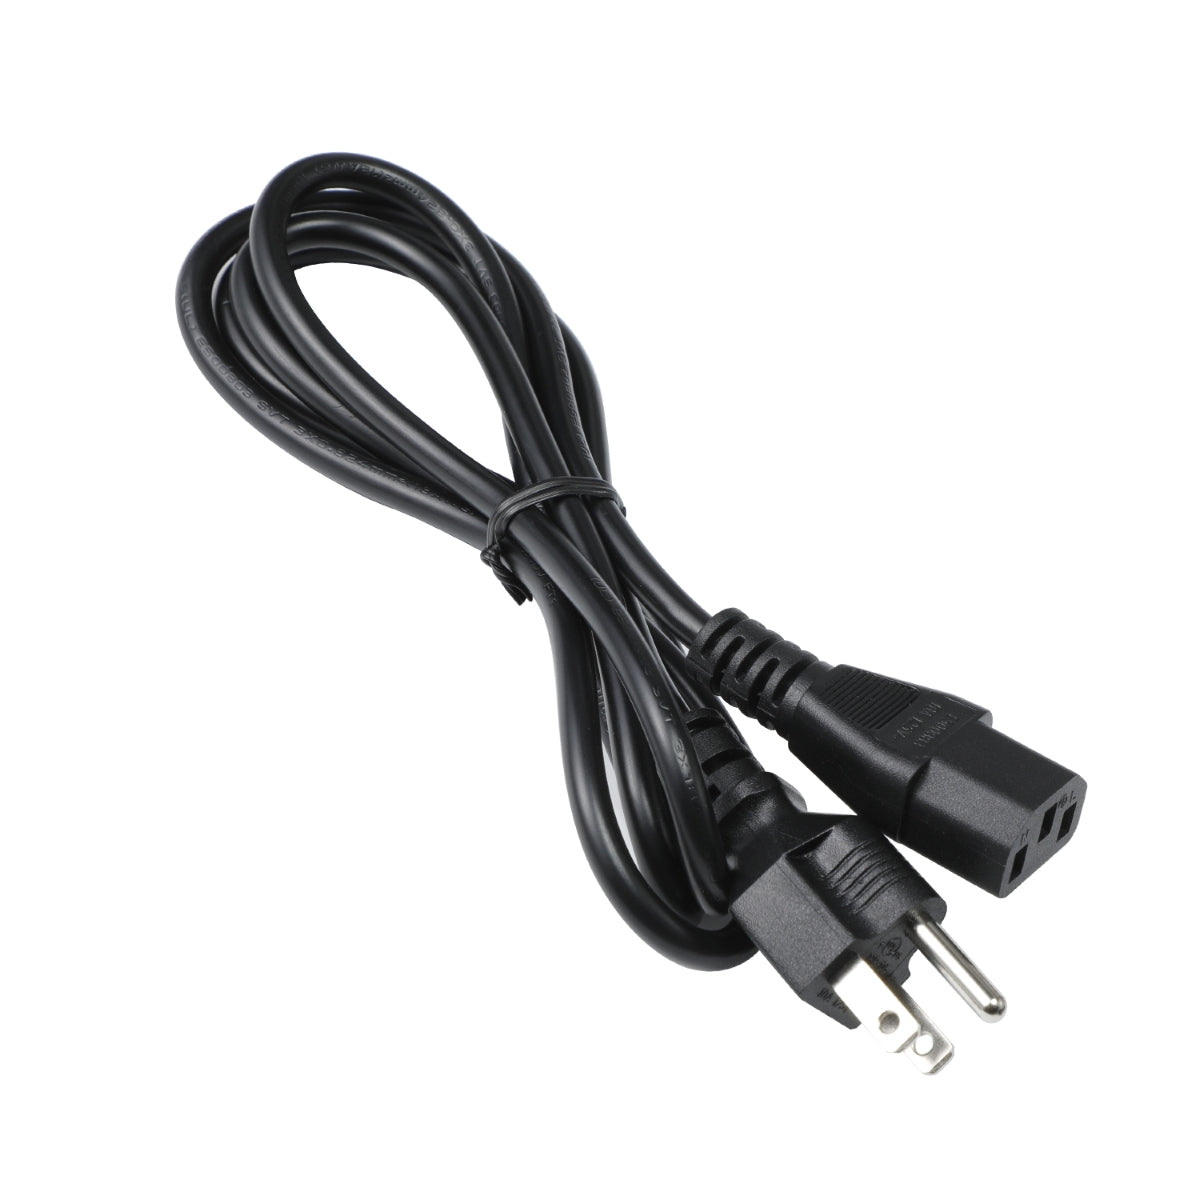 Power Cord for HP Pavilion 550-270st Computer.